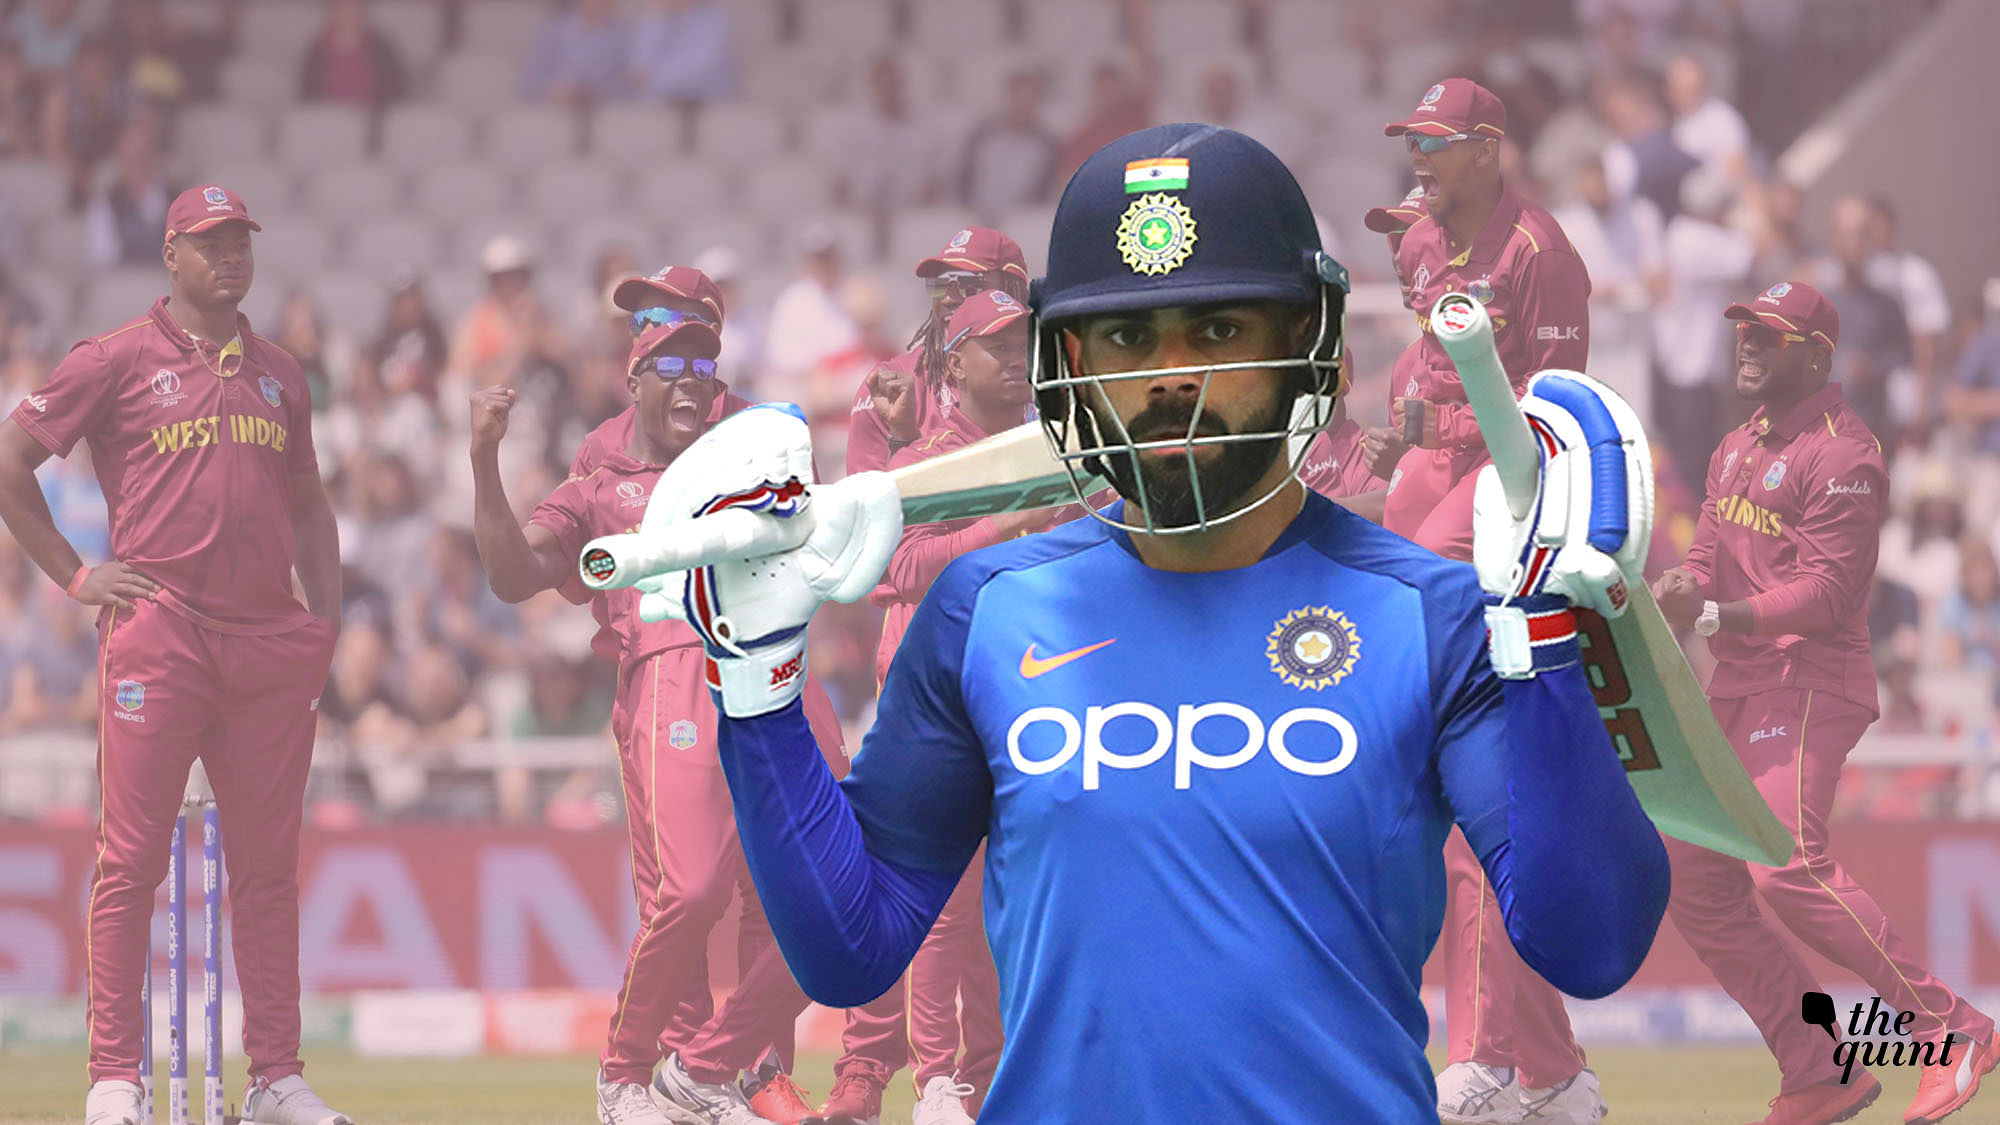 India vs West Indies Cricket Stats: Team India will aim to take one step closer to securing a semi-final berth in the ICC World Cup 2019.